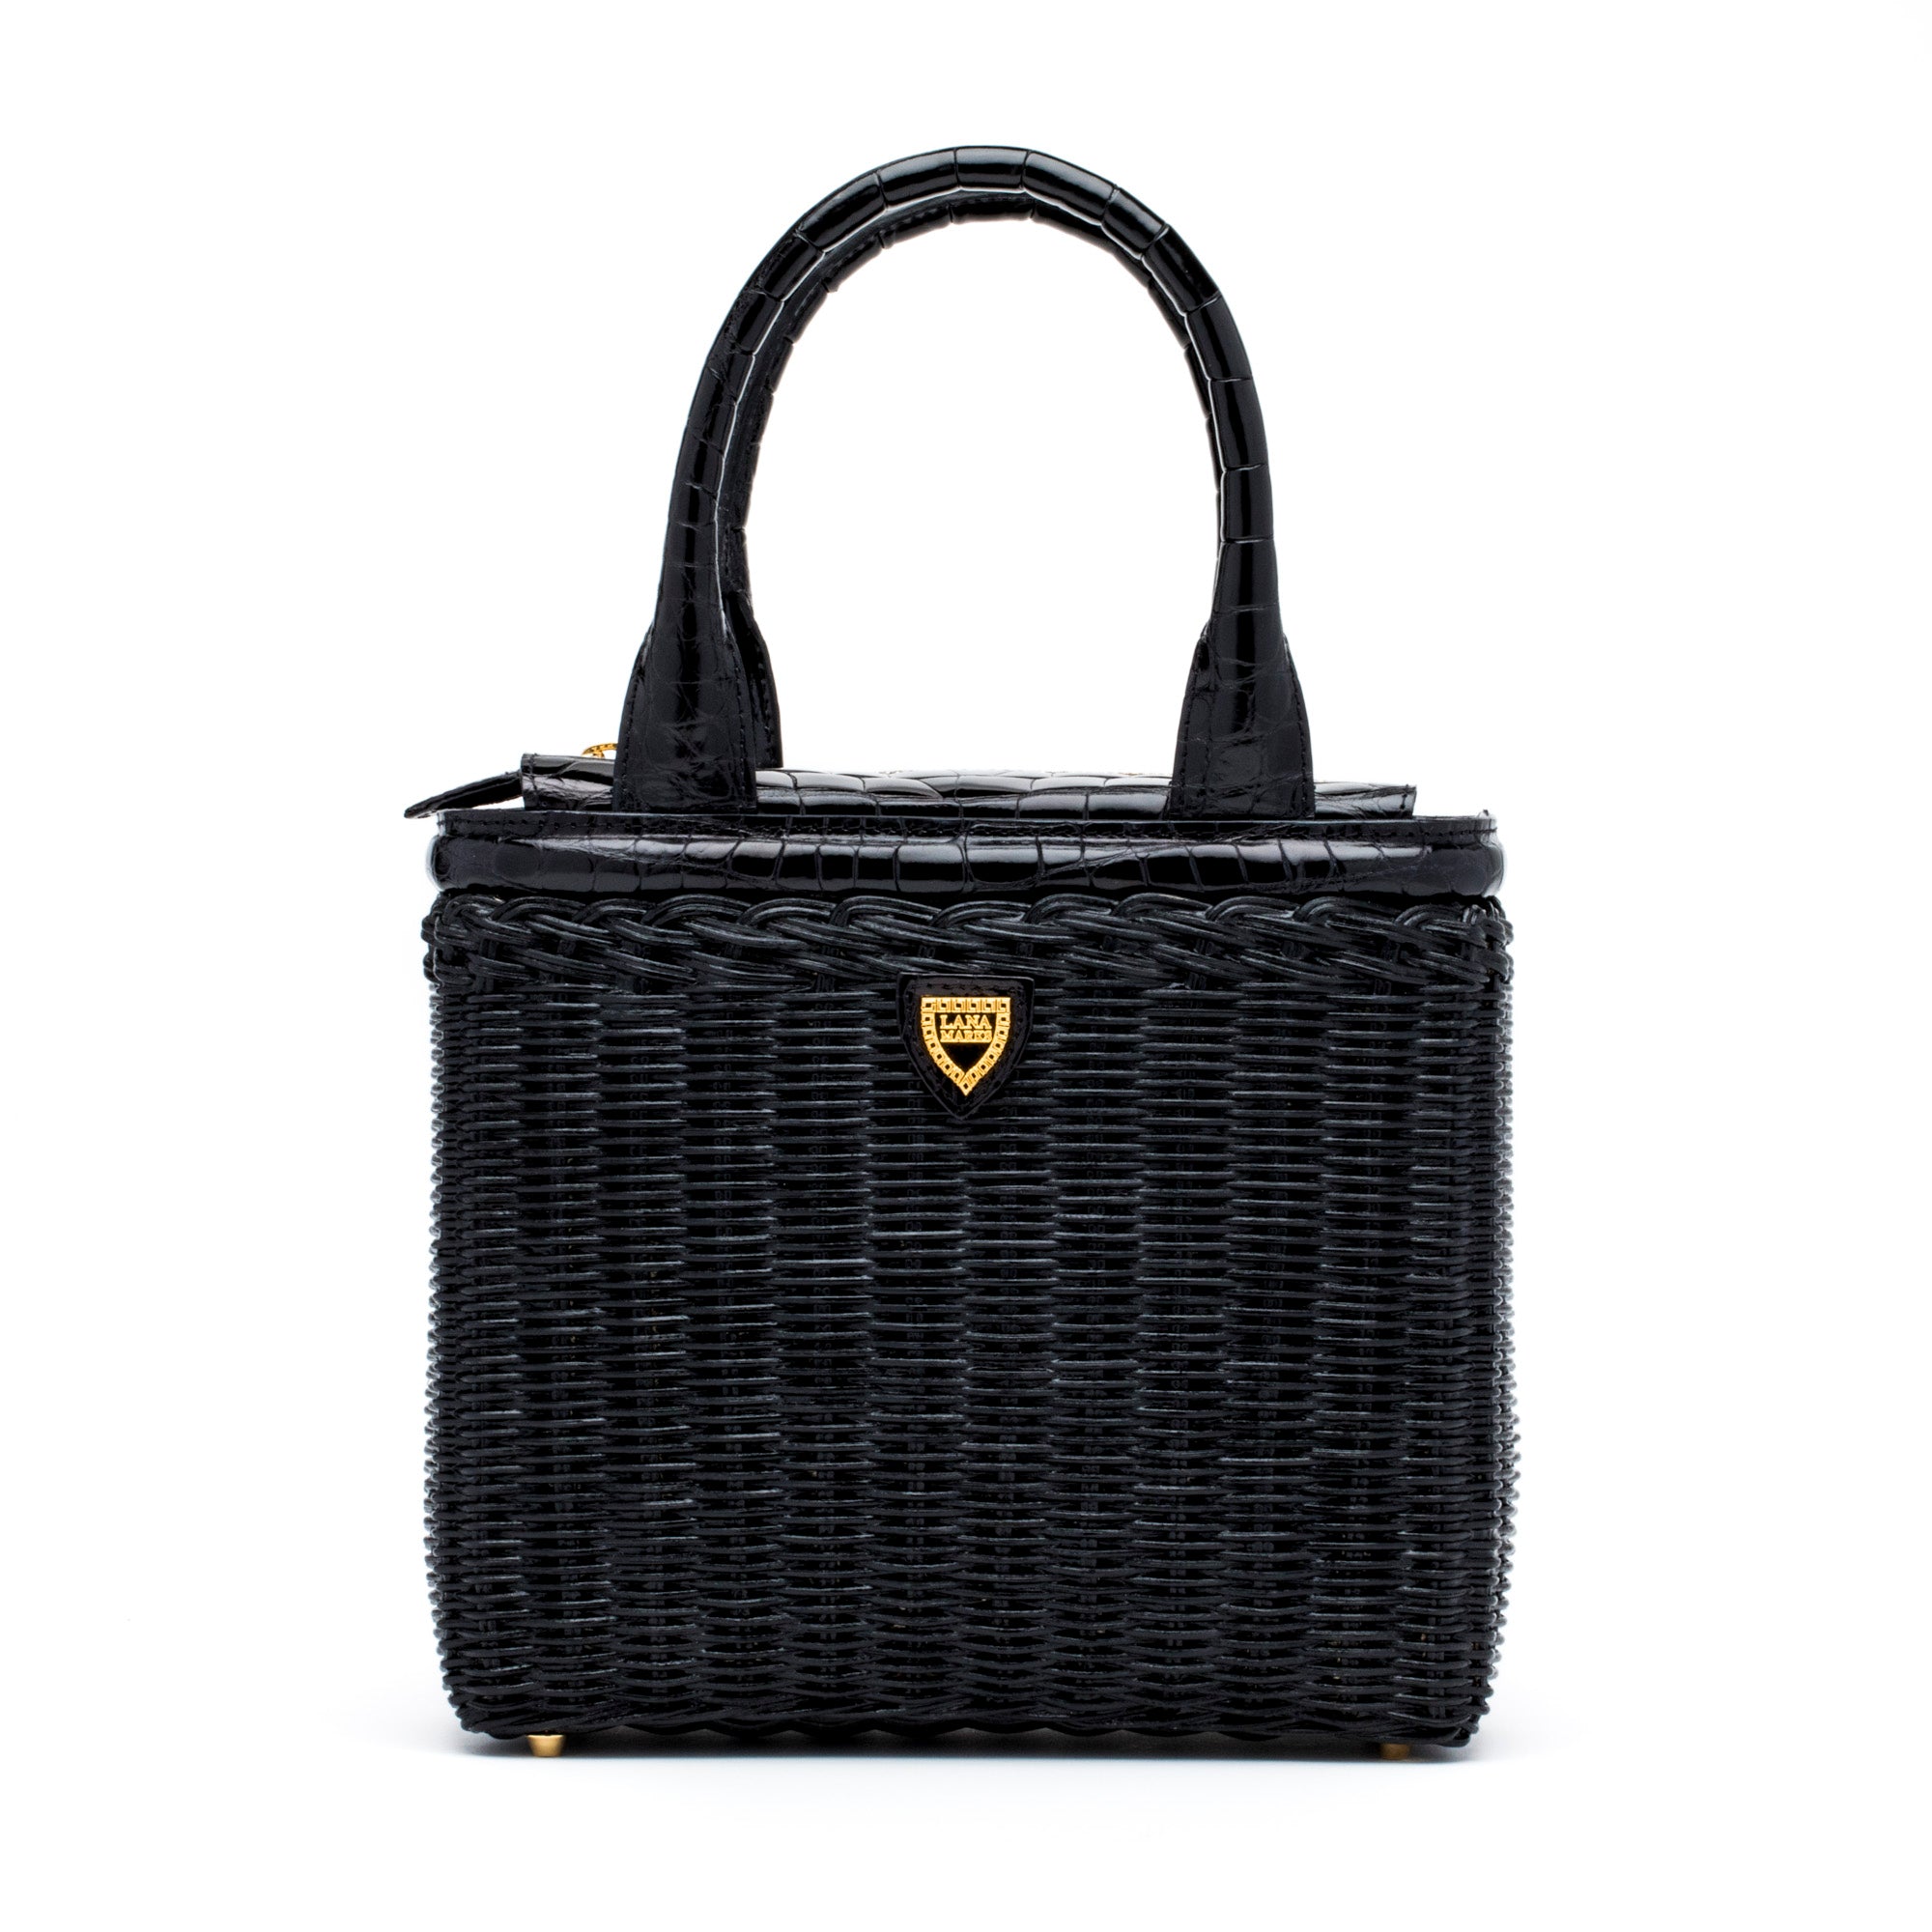 Limited Edition Palm Beach Tote in Black